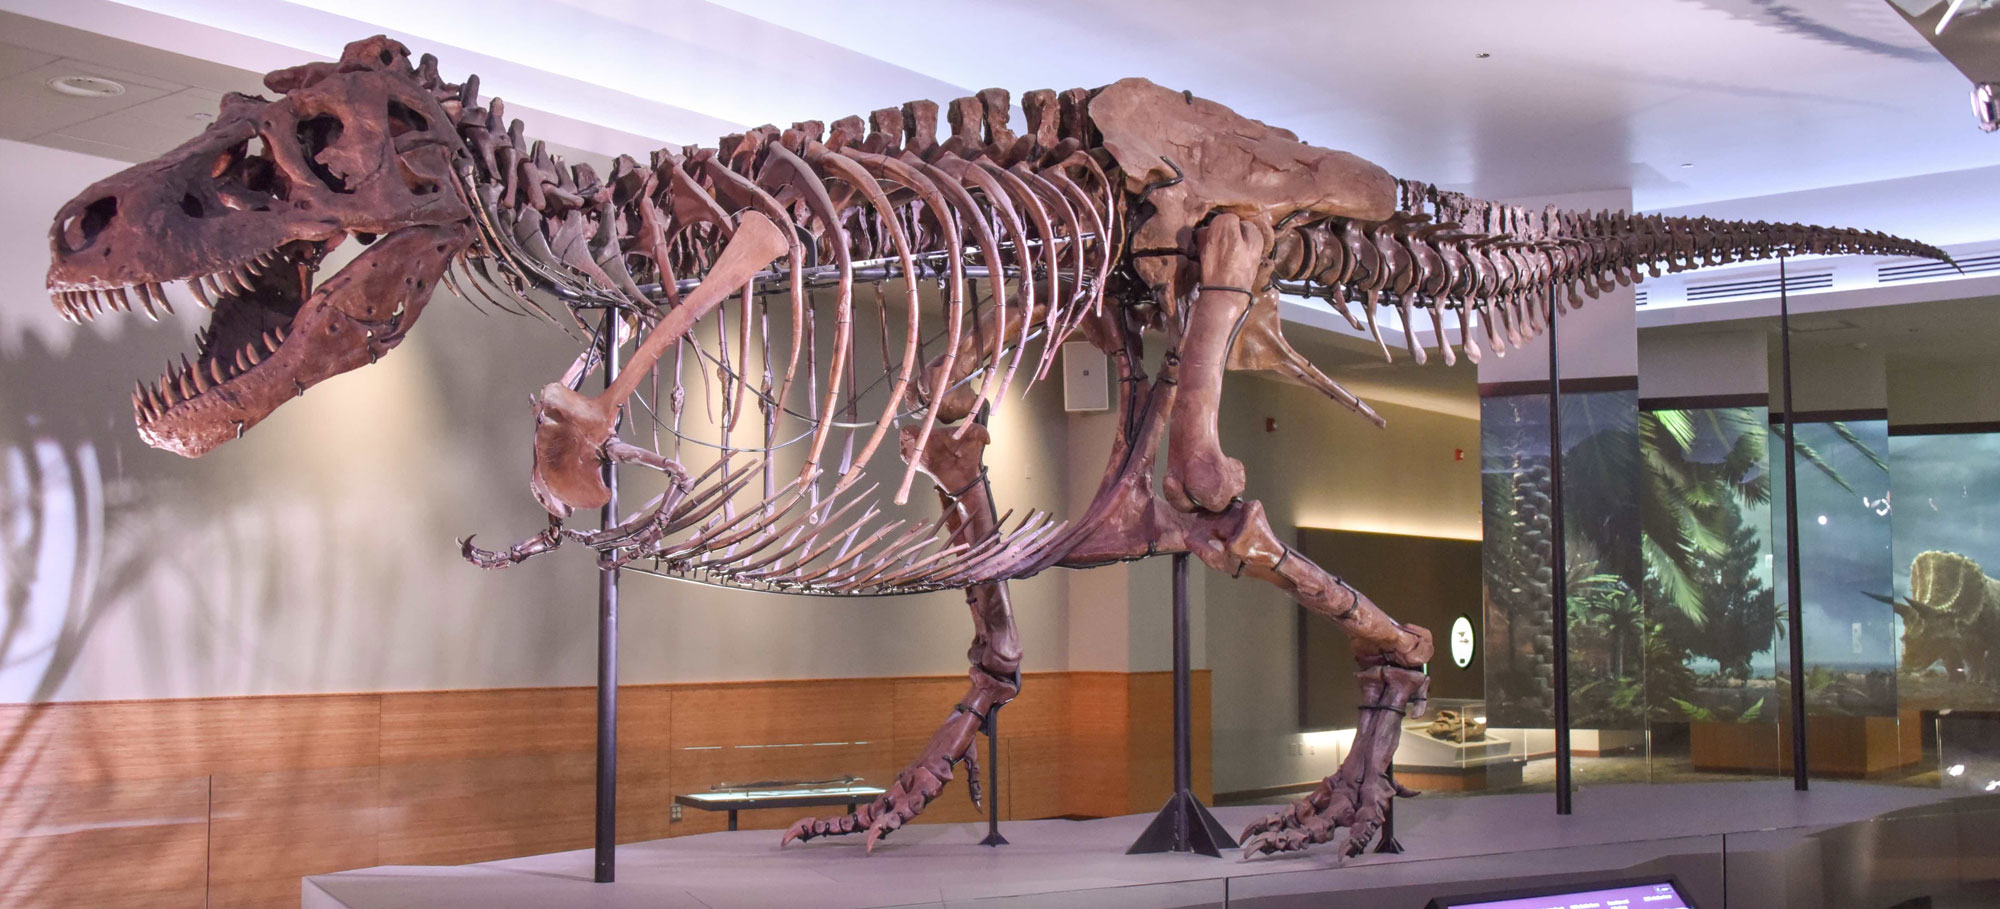 Photograph of a mounted Tyrannosaurus rex specimen called "Sue" on display at the Field Museum in Chicago. Tyrannosaurus is a carnivorous dinosaur with a large skull and large, slightly curved, pointed teeth; it is bipedal, with powerful hind legs and relatively puny arms. The tail is long and held up off the ground. The photo is taken from the side of the skeleton, showing its full length. The skeleton is mounted in a striding position.